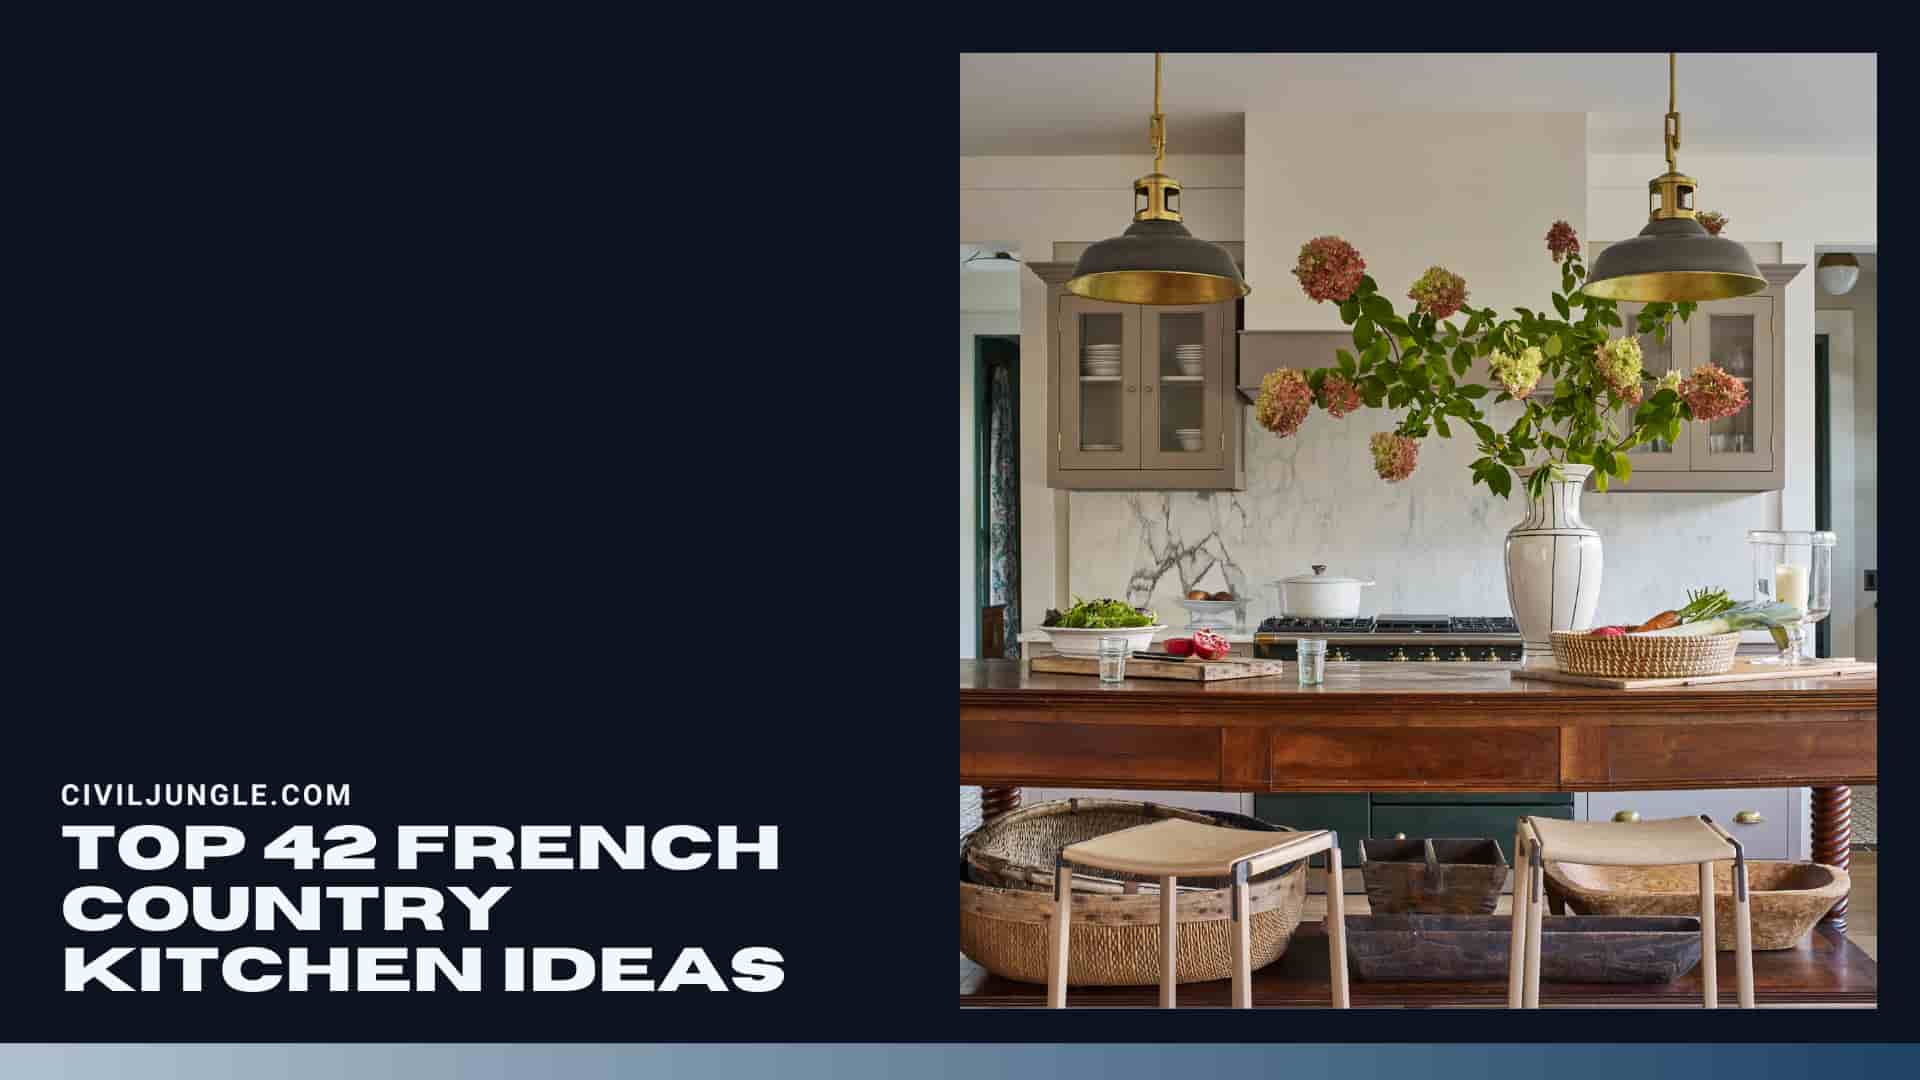 Top 42 French Country Kitchen Ideas